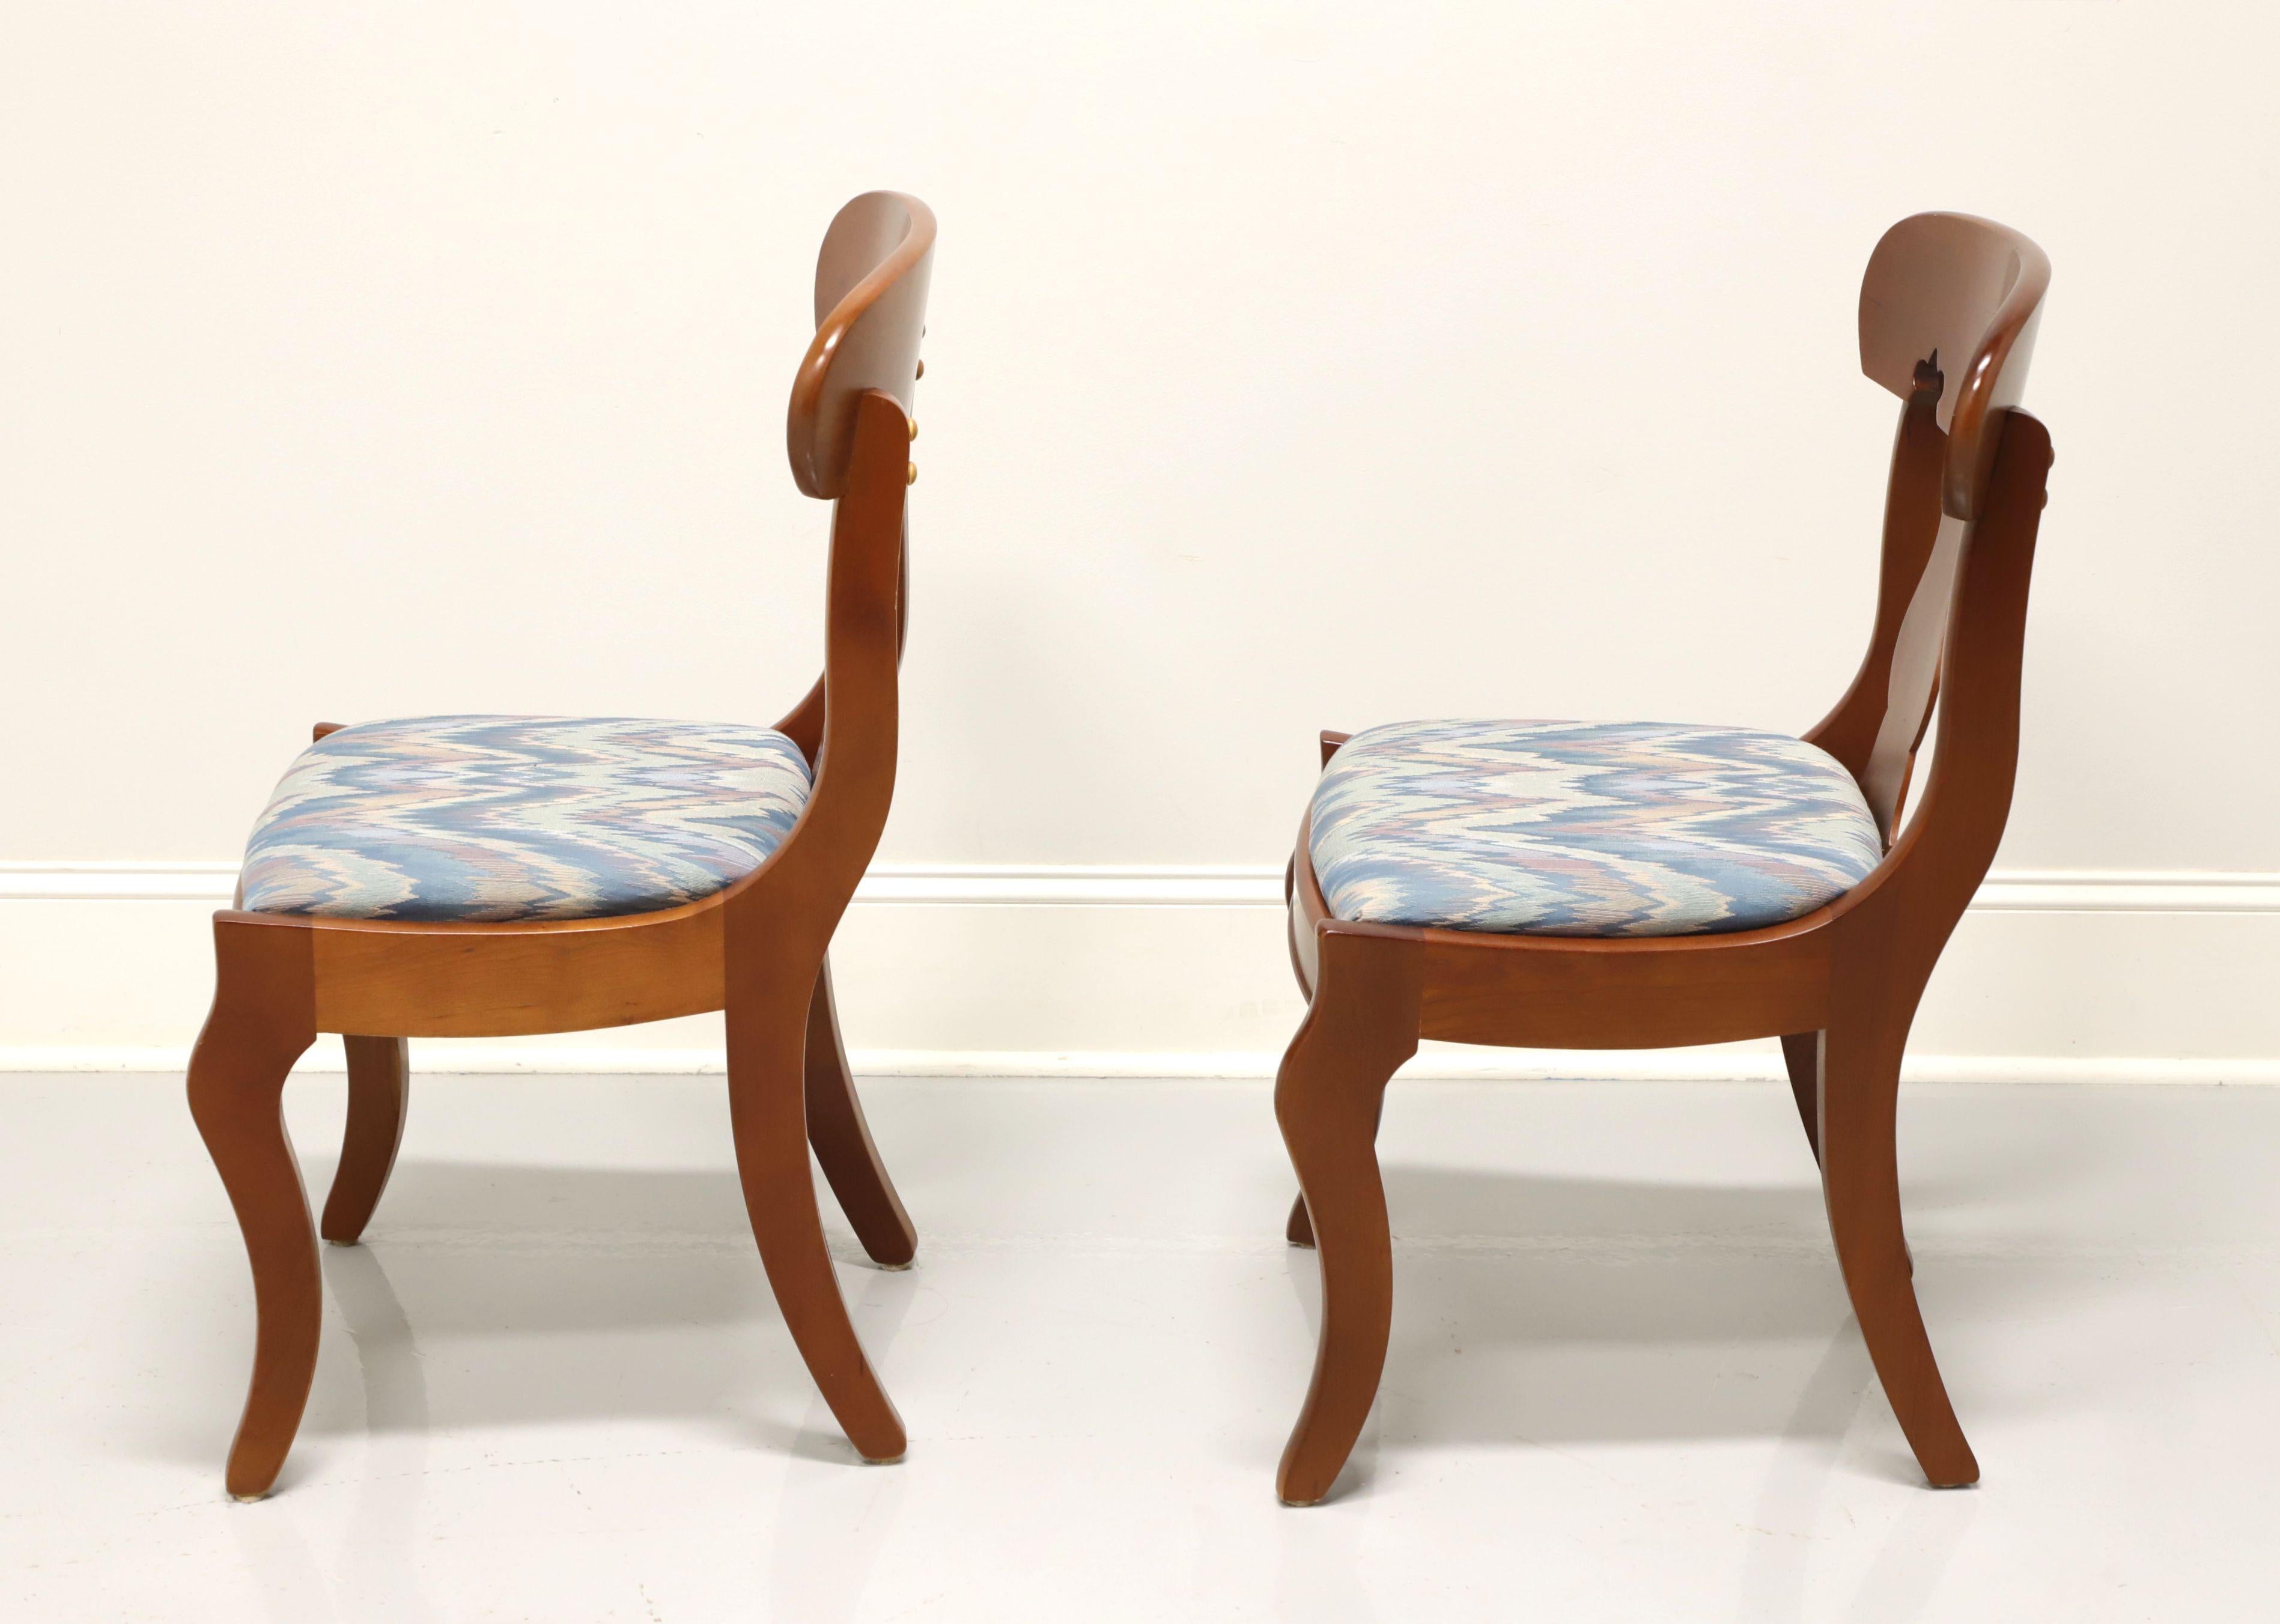 Fabric CASSADY Solid Cherry Empire Style Dining Side Chairs - Pair A